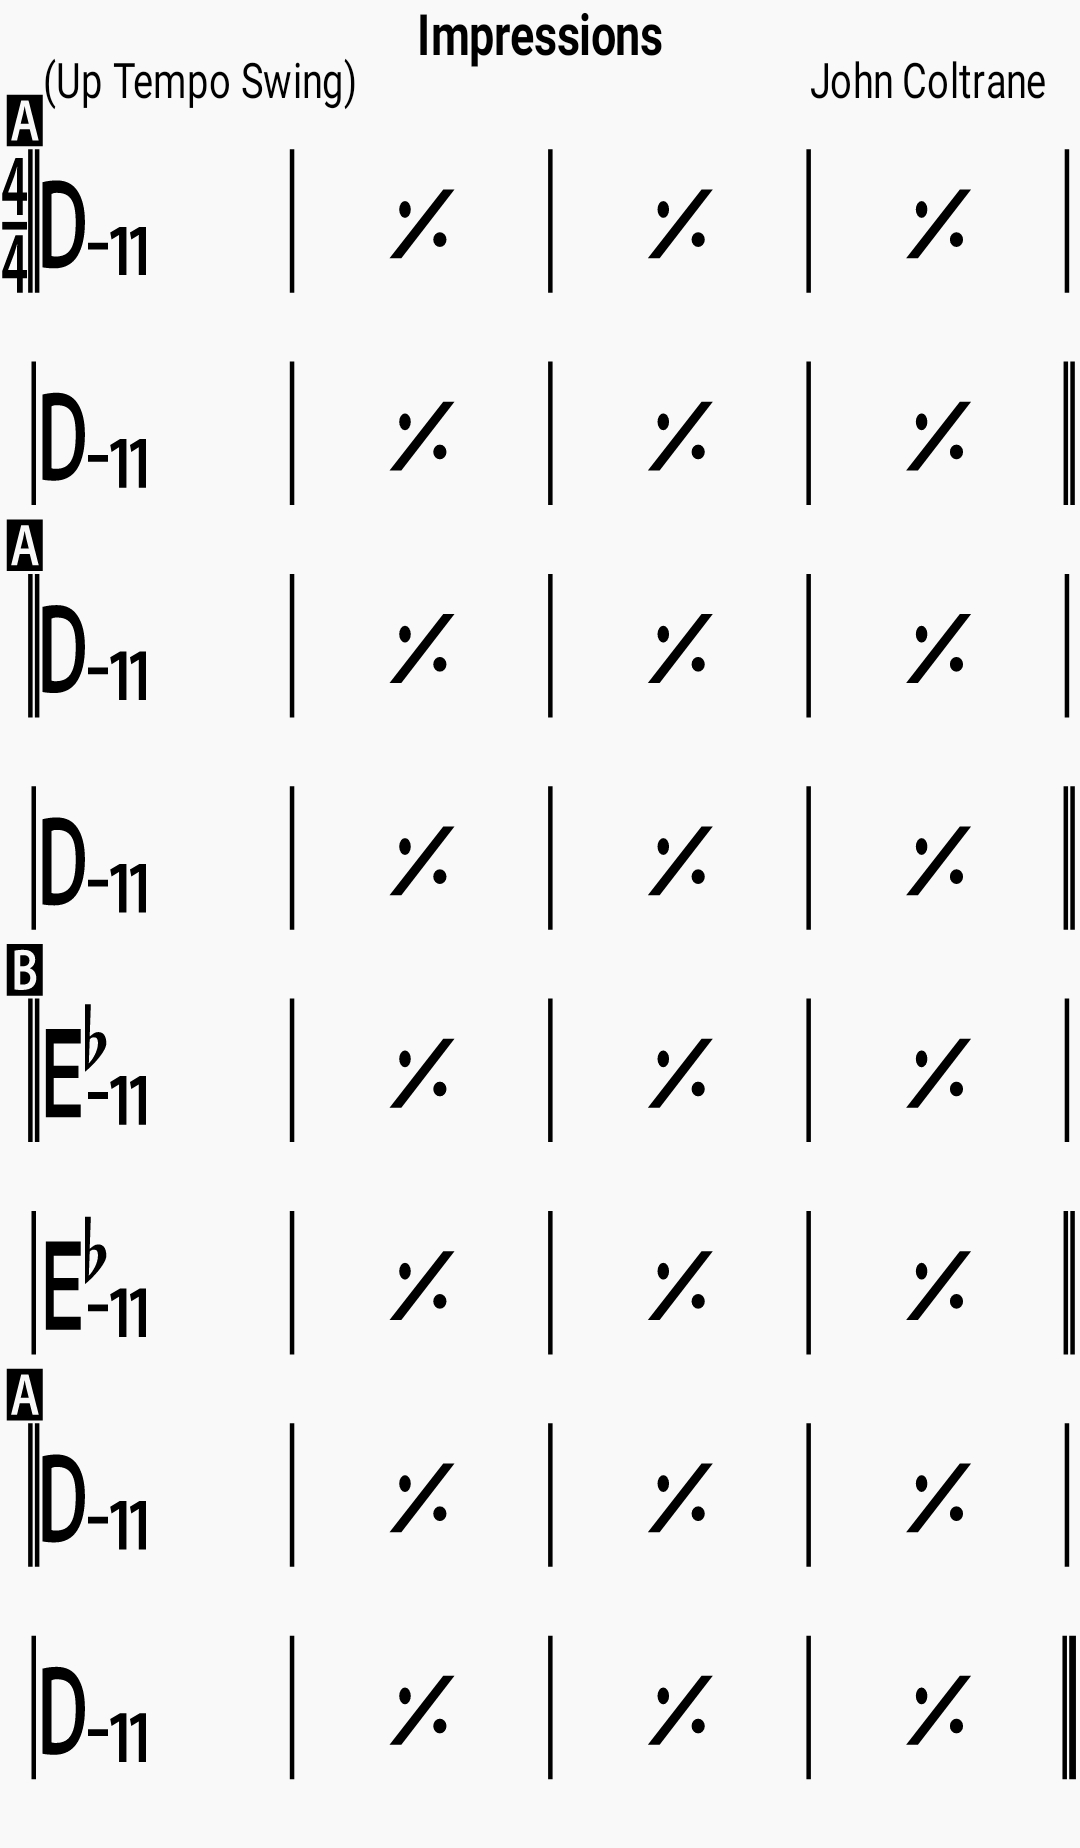 Chord chart for the jazz standard Impressions